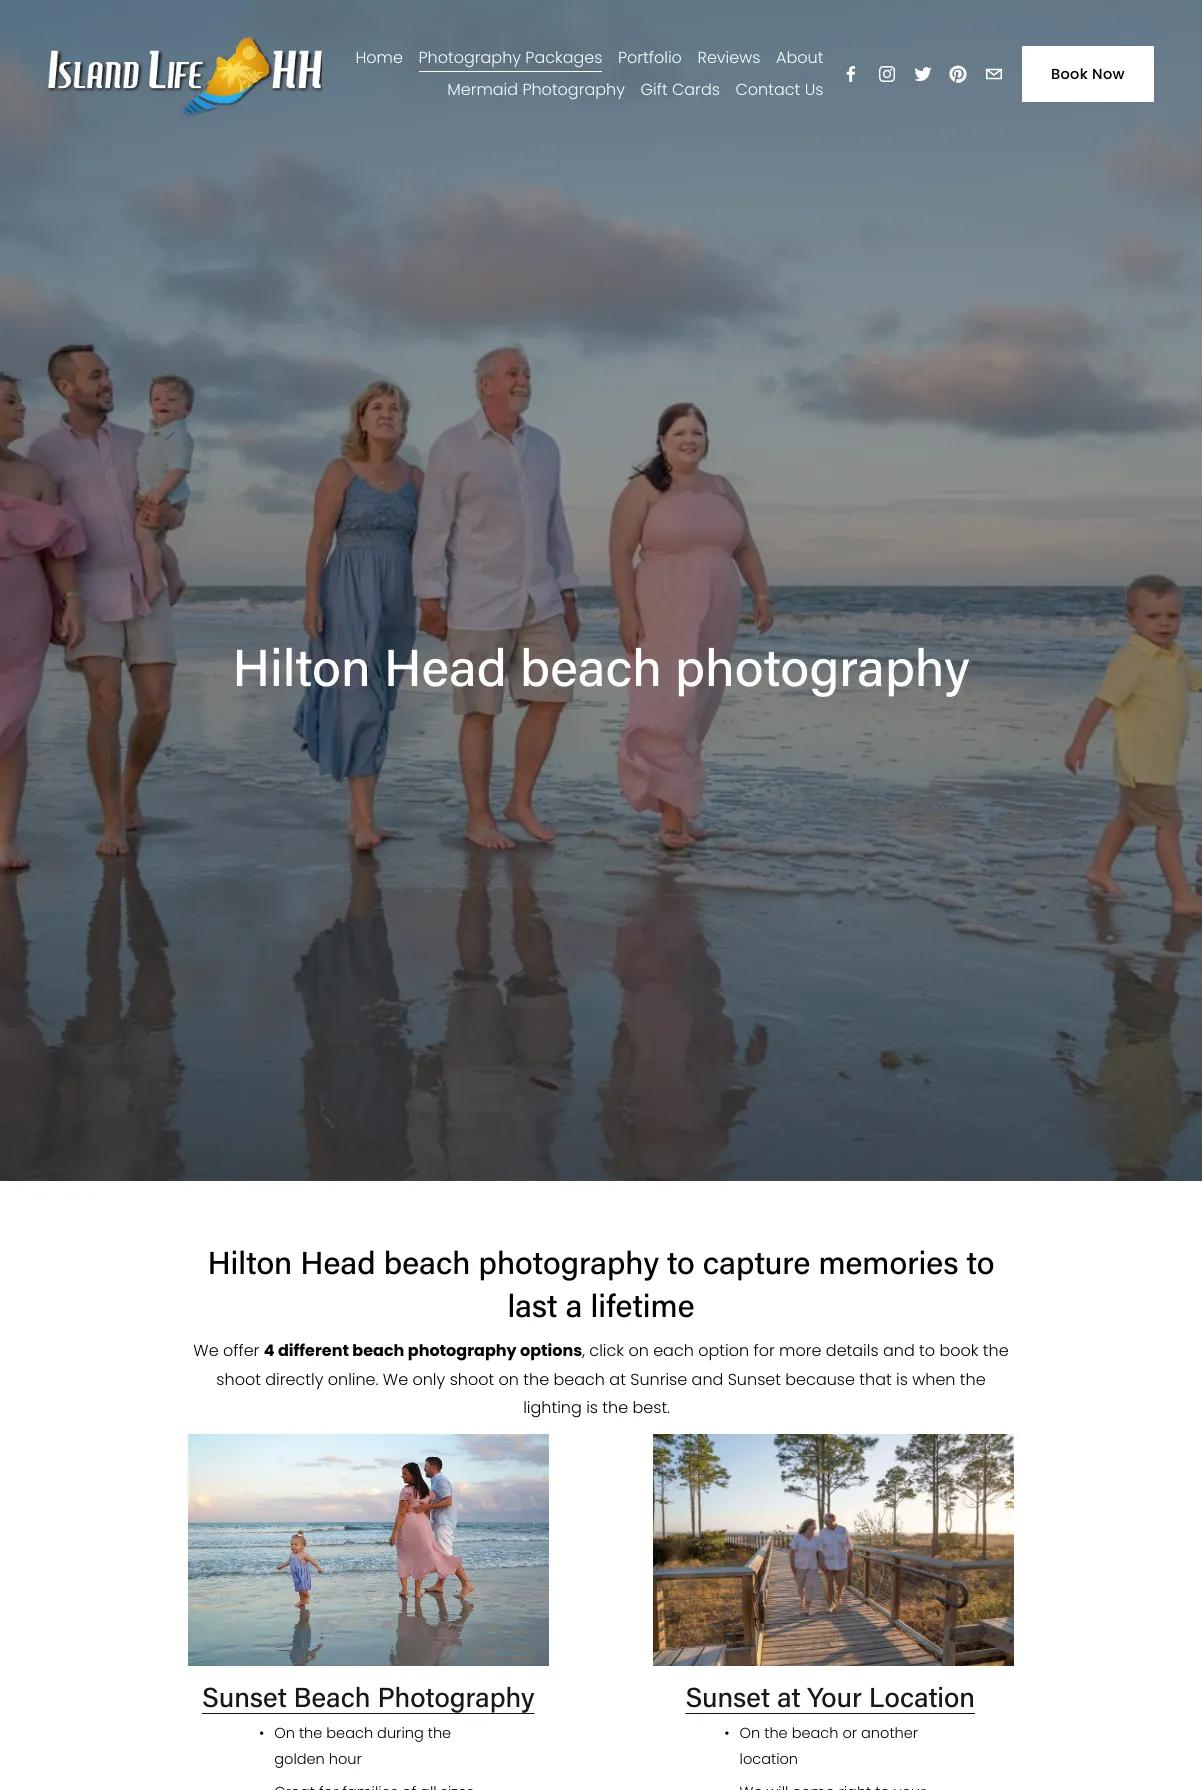 Screenshot 2 of Island Life HH Photography (Example Squarespace Photography Website)